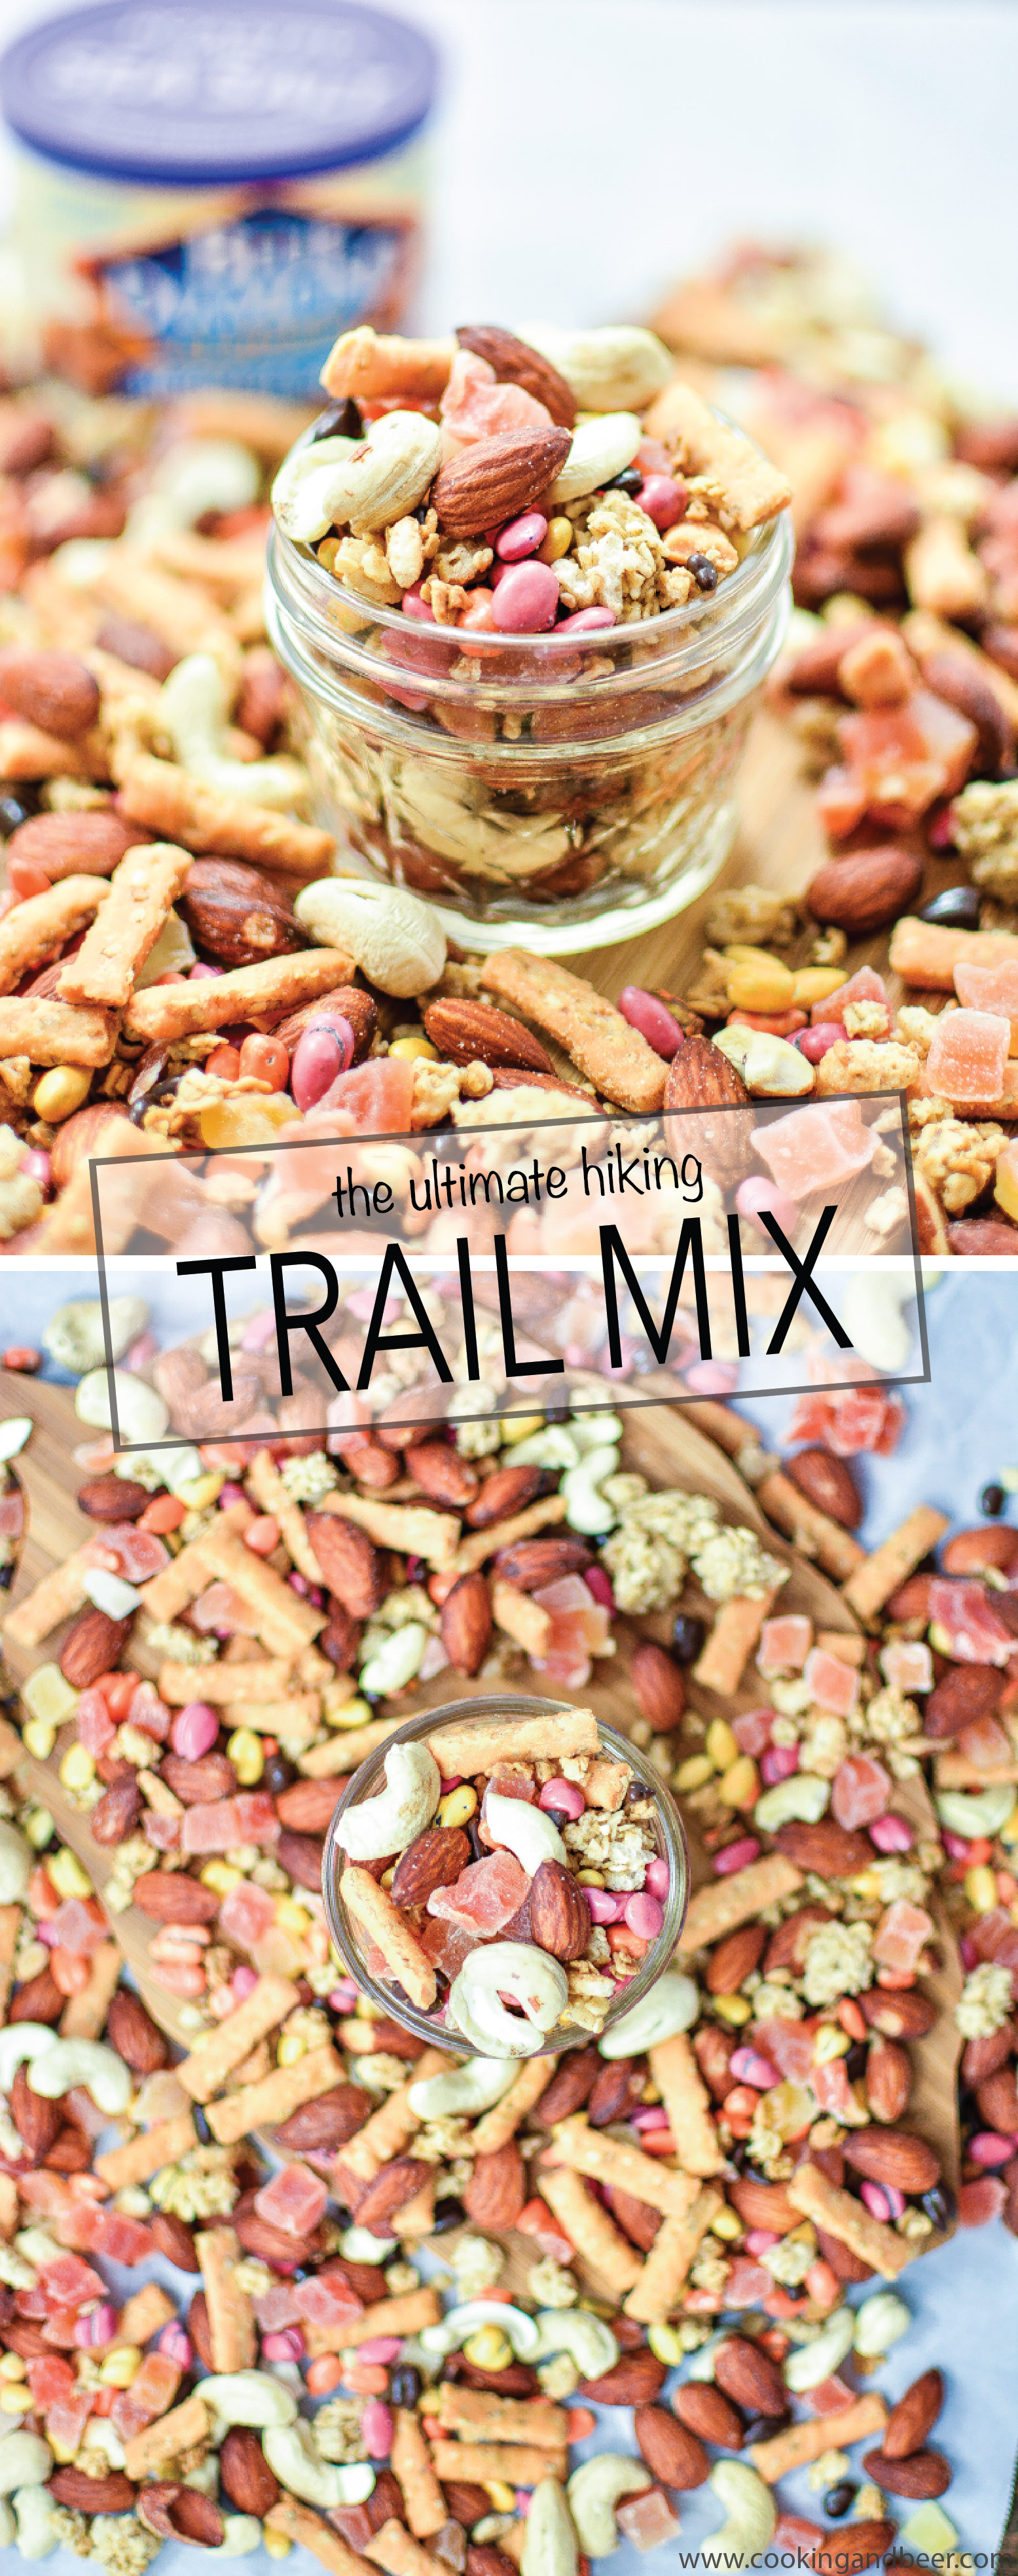 The Ultimate Hiking Trail Mix